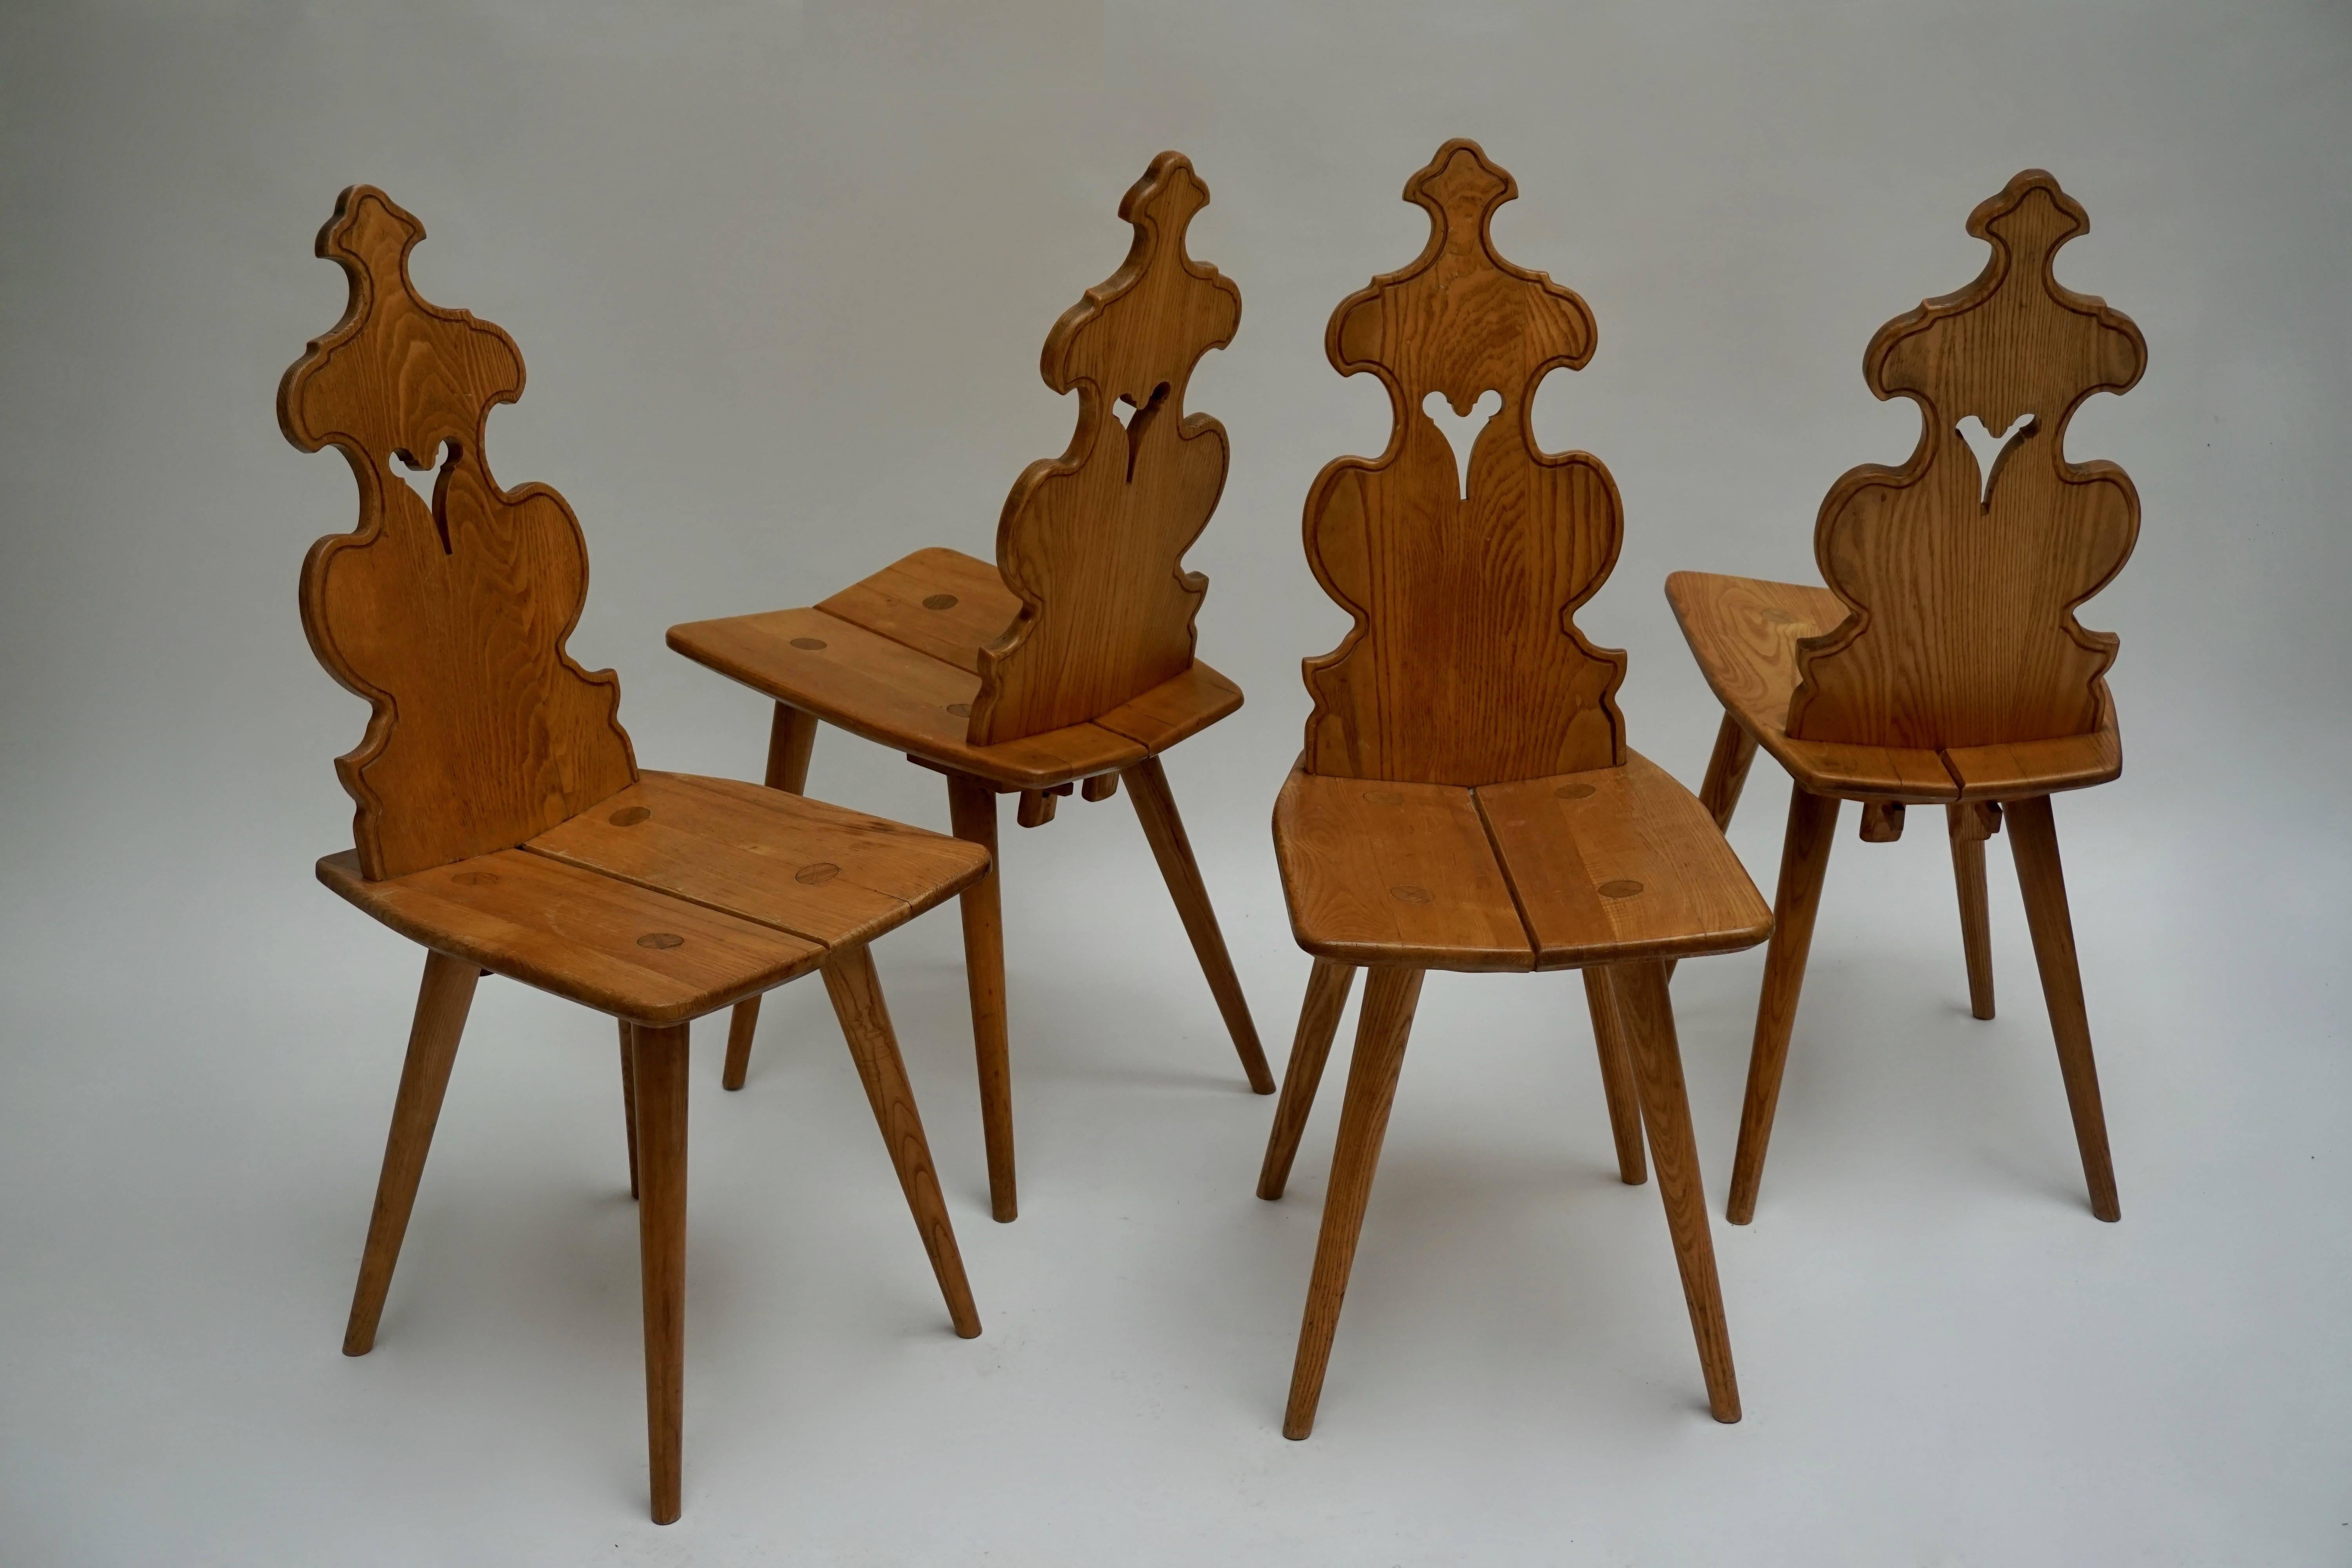 Wooden chairs, Poland.
Measures: Height 92 cm.